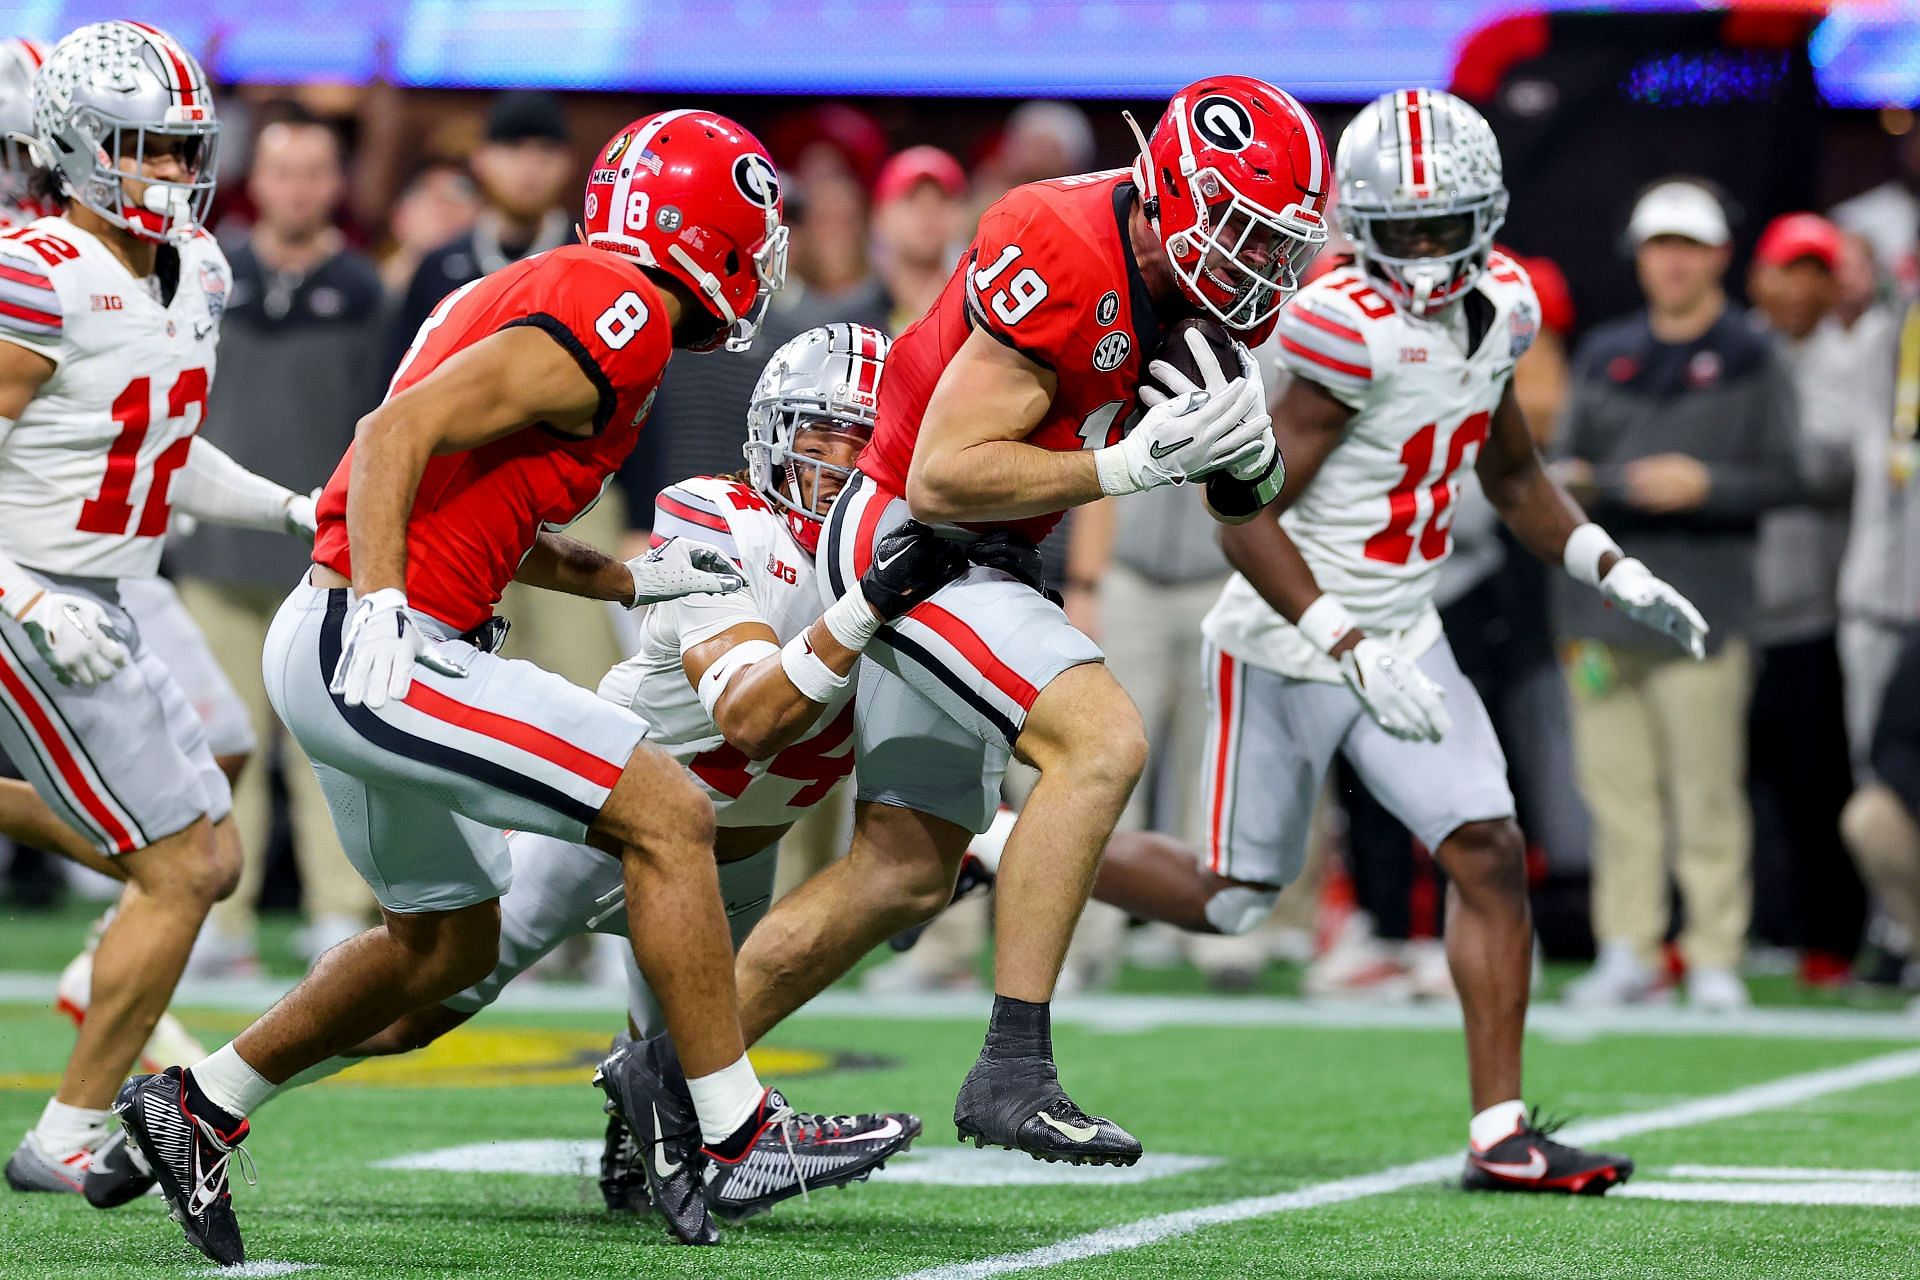 Brock Bowers #19 of the Georgia Bulldogs is tackled by Ronnie Hickman #14 of the Ohio State Buckeyes